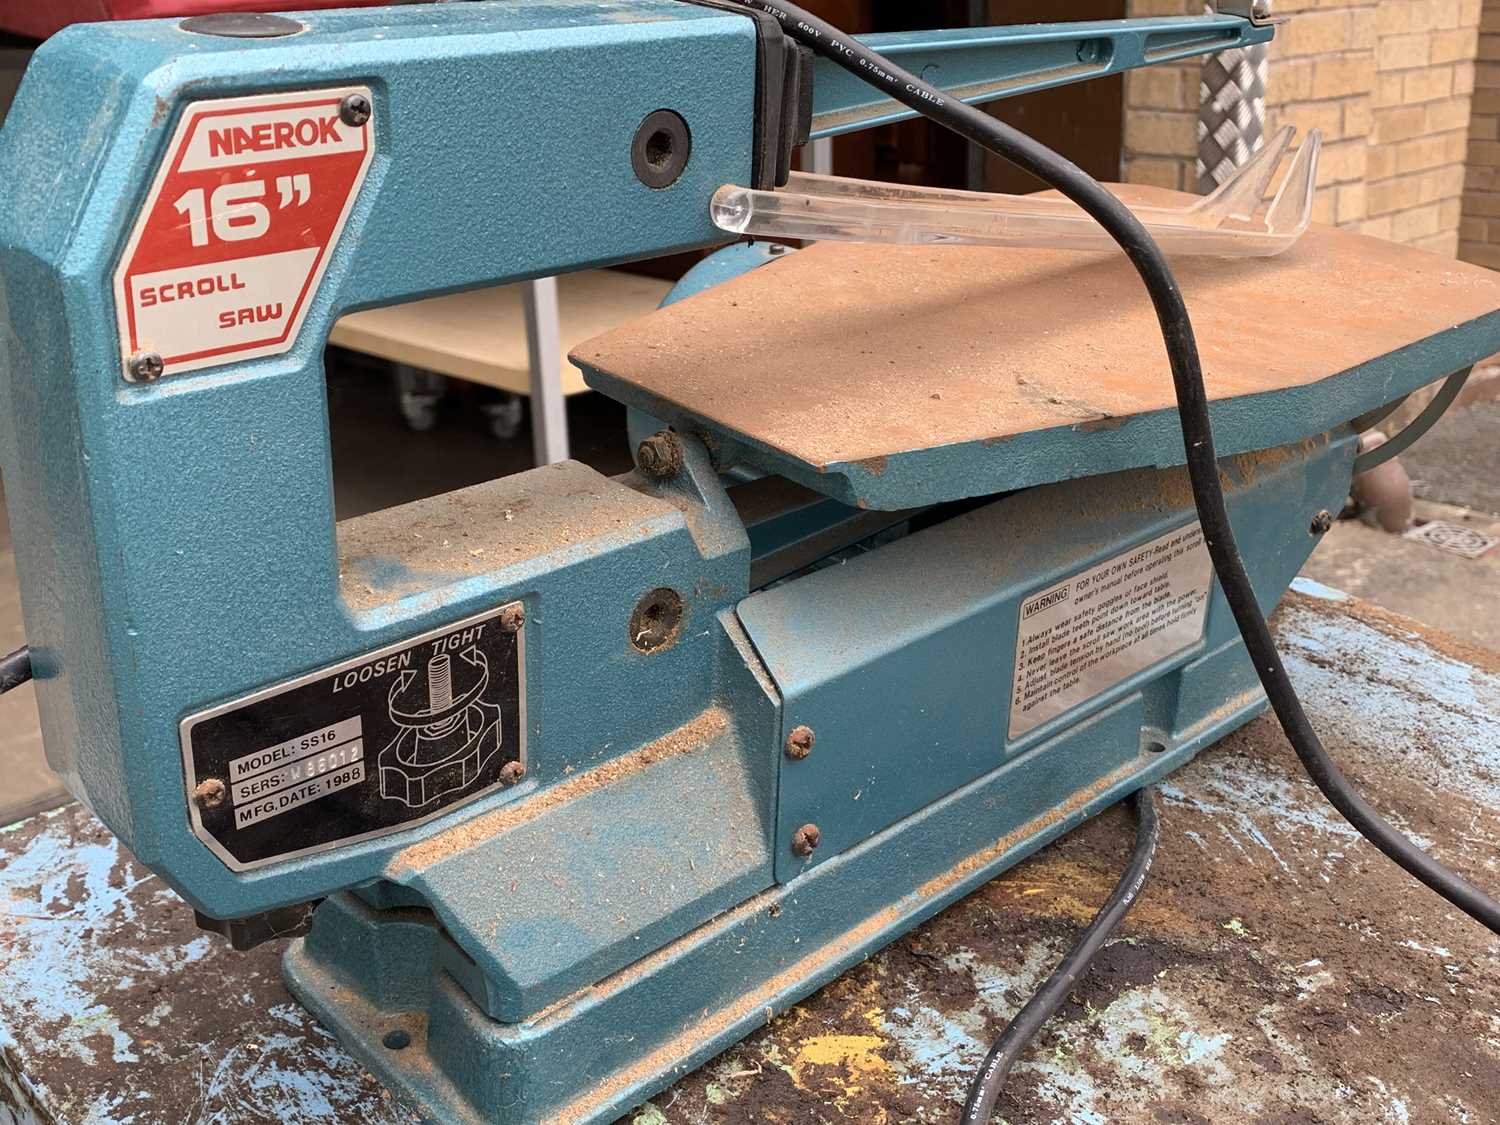 PILLAR DRILL - Tull International LT-13J, a Naerok 16ins scroll saw and a heavy metal work table, - Image 2 of 5